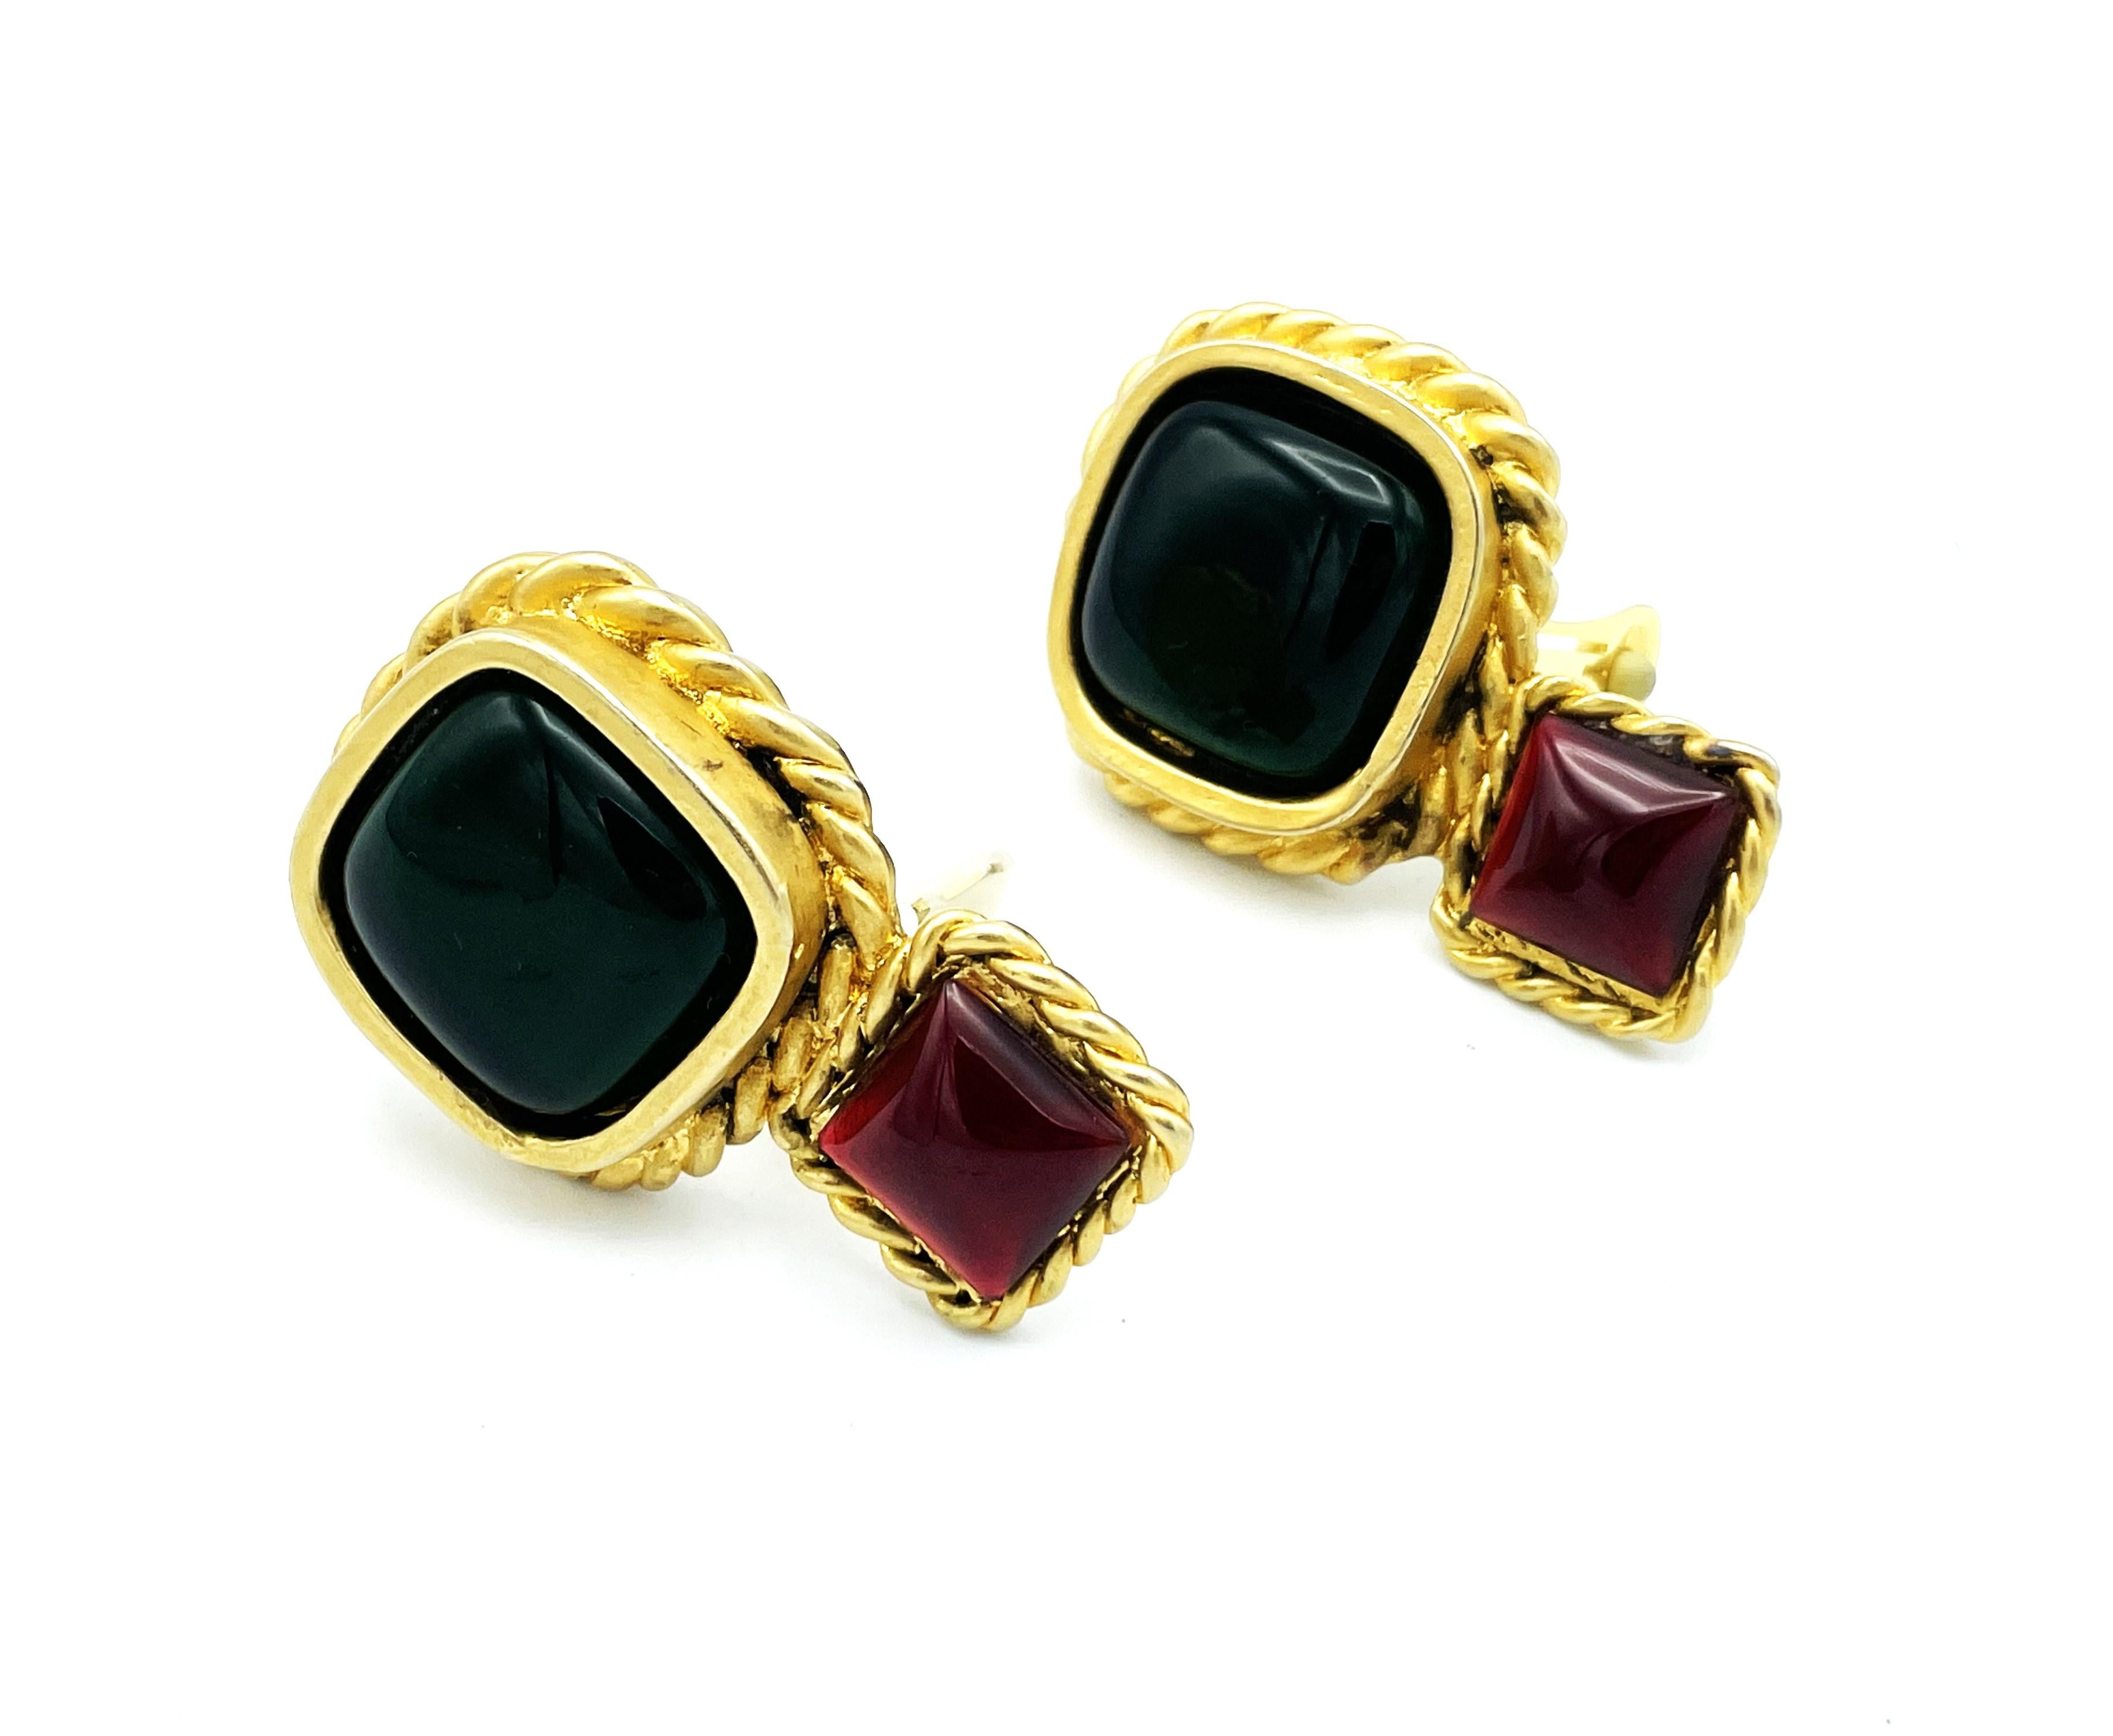 ICONIC CHANEL CLIP-ON EARRING green and red poured glass by Gripoix, Resin 1990s For Sale 3